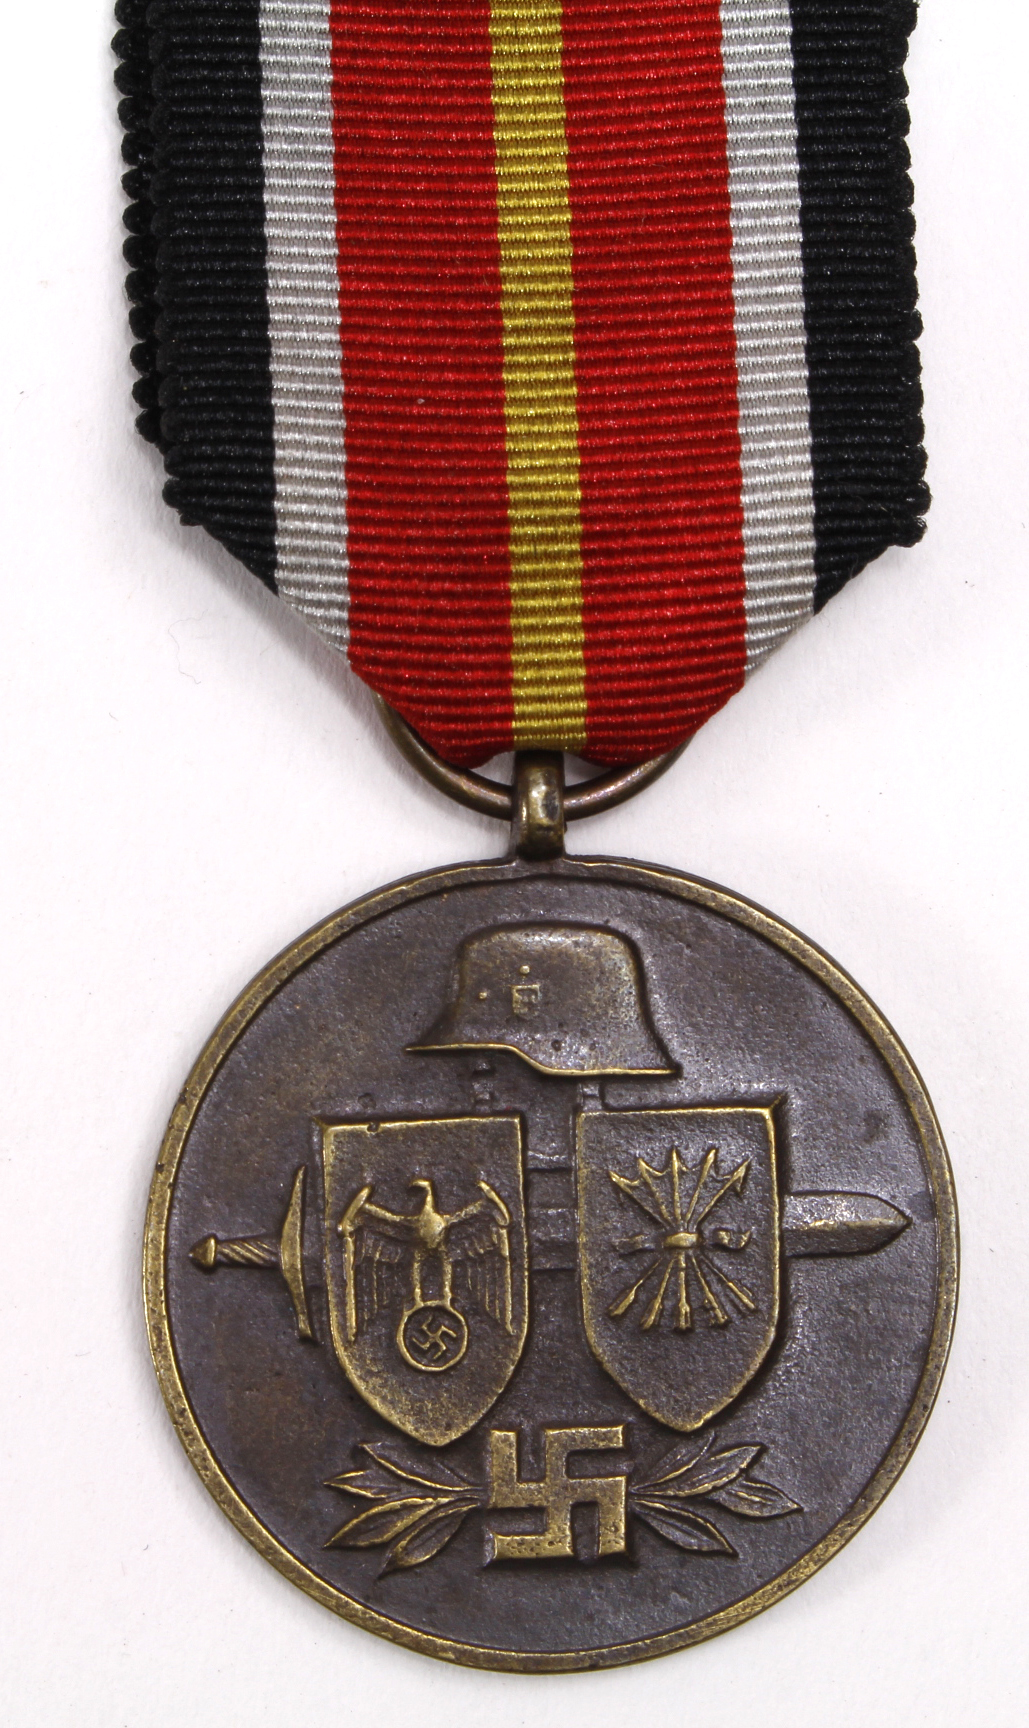 German Spanish Azul Blue Division medal for volunteers who fought on the Russian front